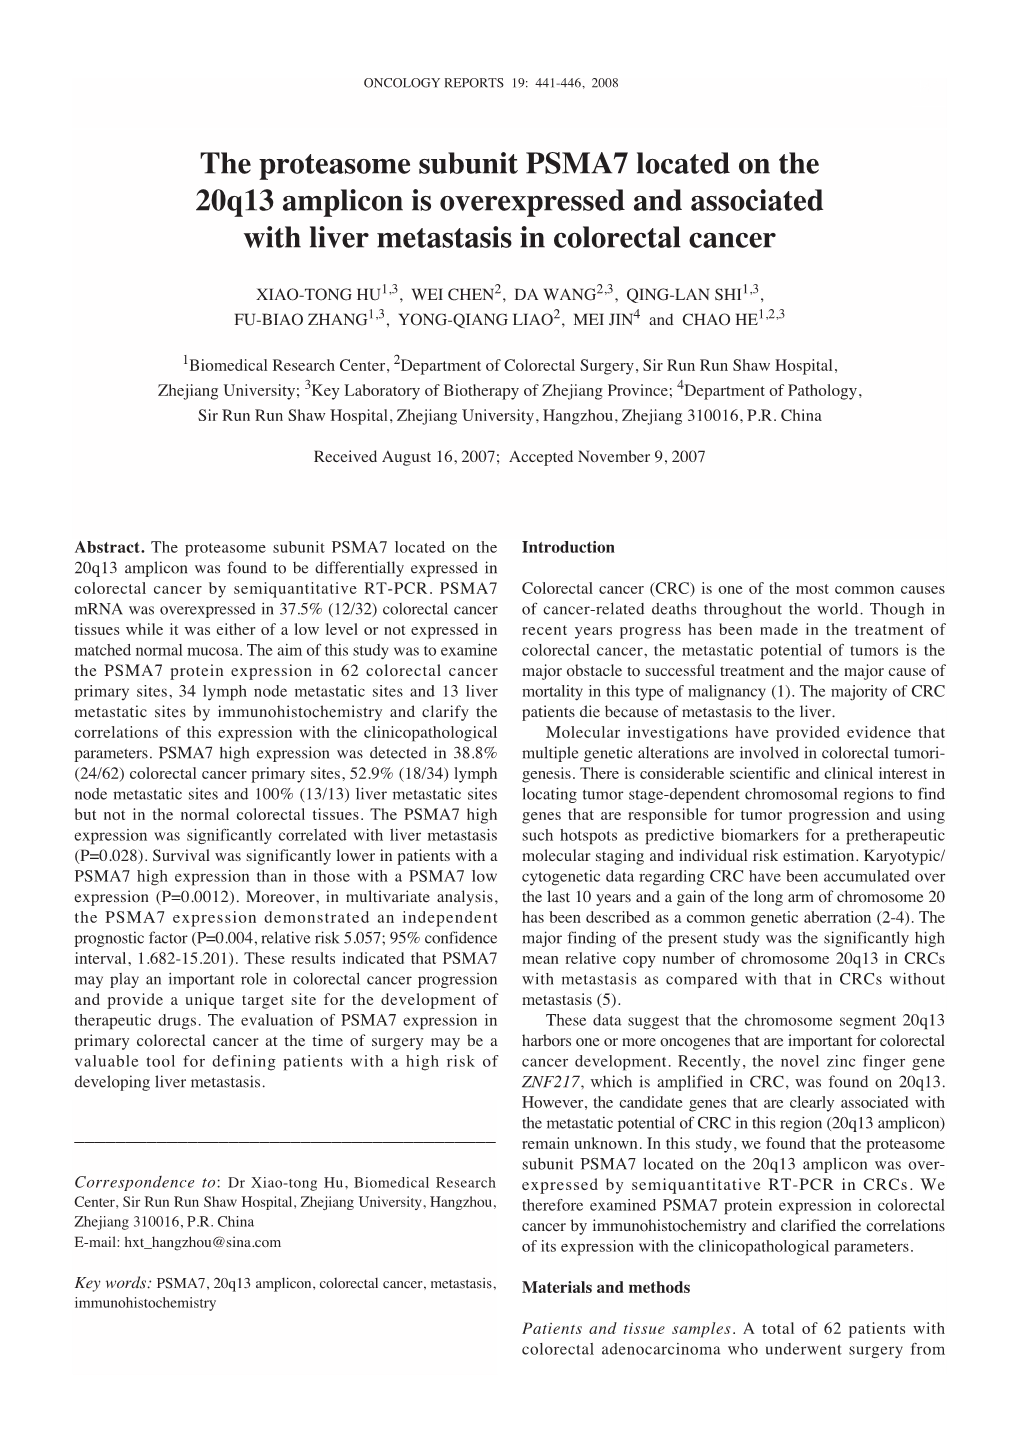 The Proteasome Subunit PSMA7 Located on the 20Q13 Amplicon Is Overexpressed and Associated with Liver Metastasis in Colorectal Cancer